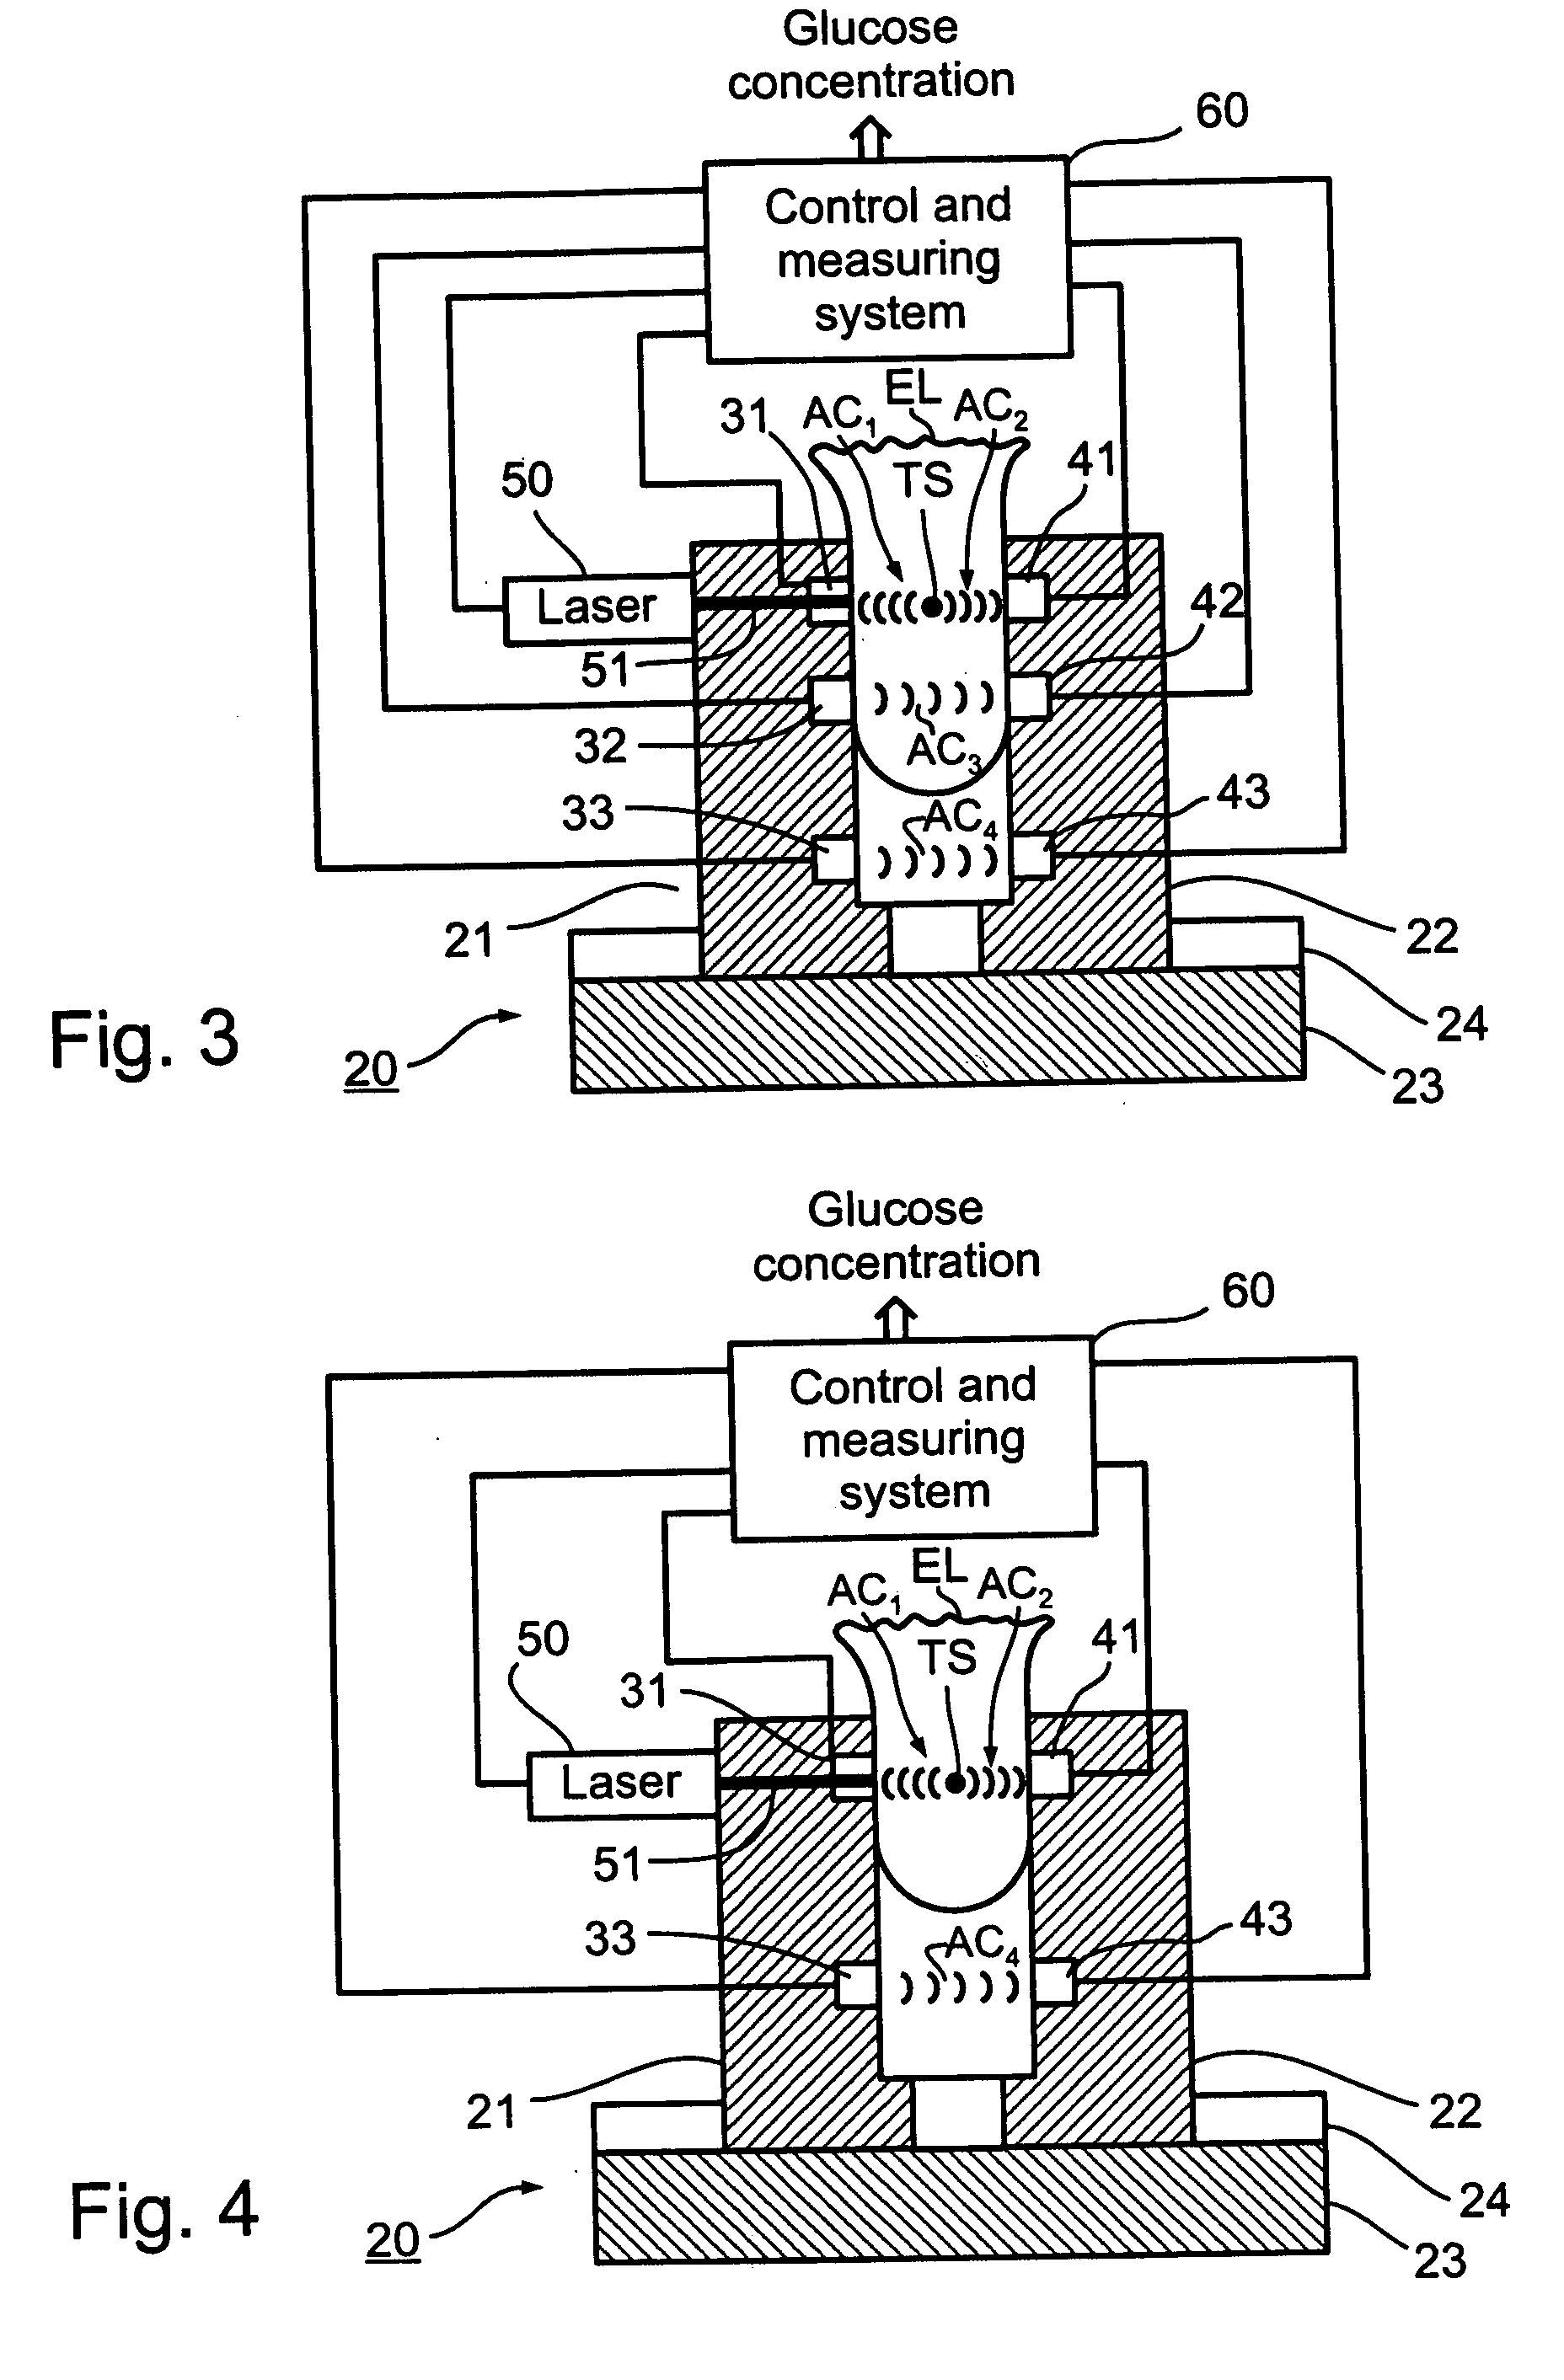 Method and apparatus for non-invasively monitoring concentrations of glucose or other target substances